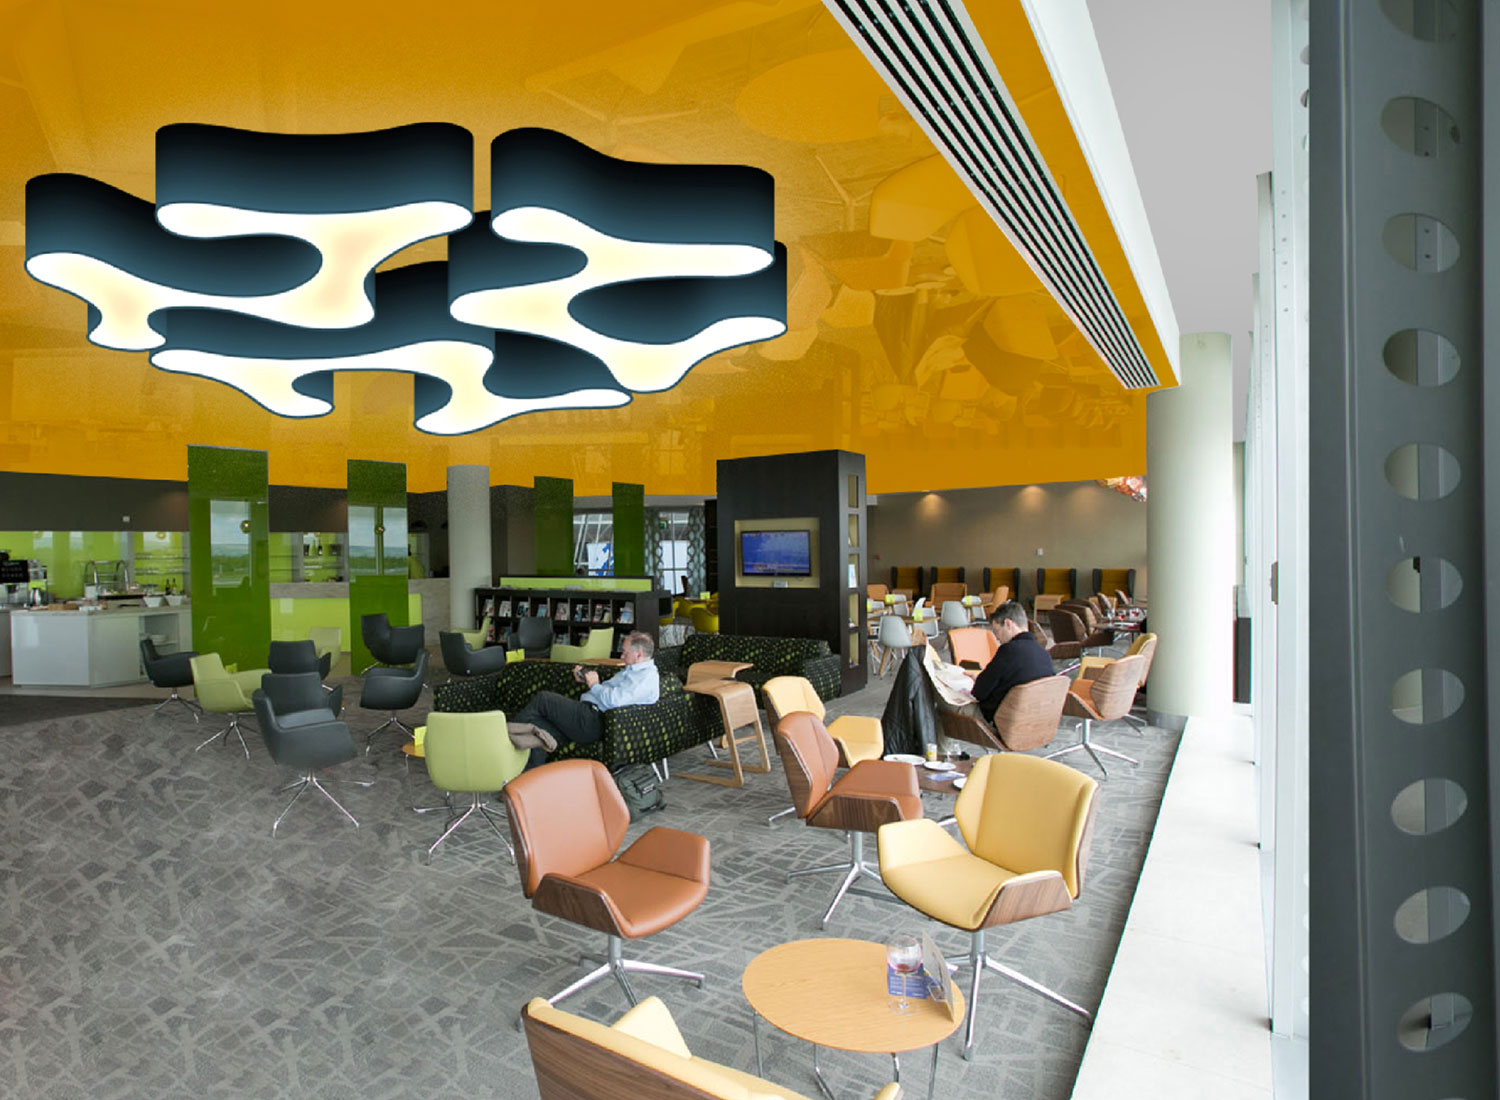 food court -3d stretch ceiling translucent with backlighting